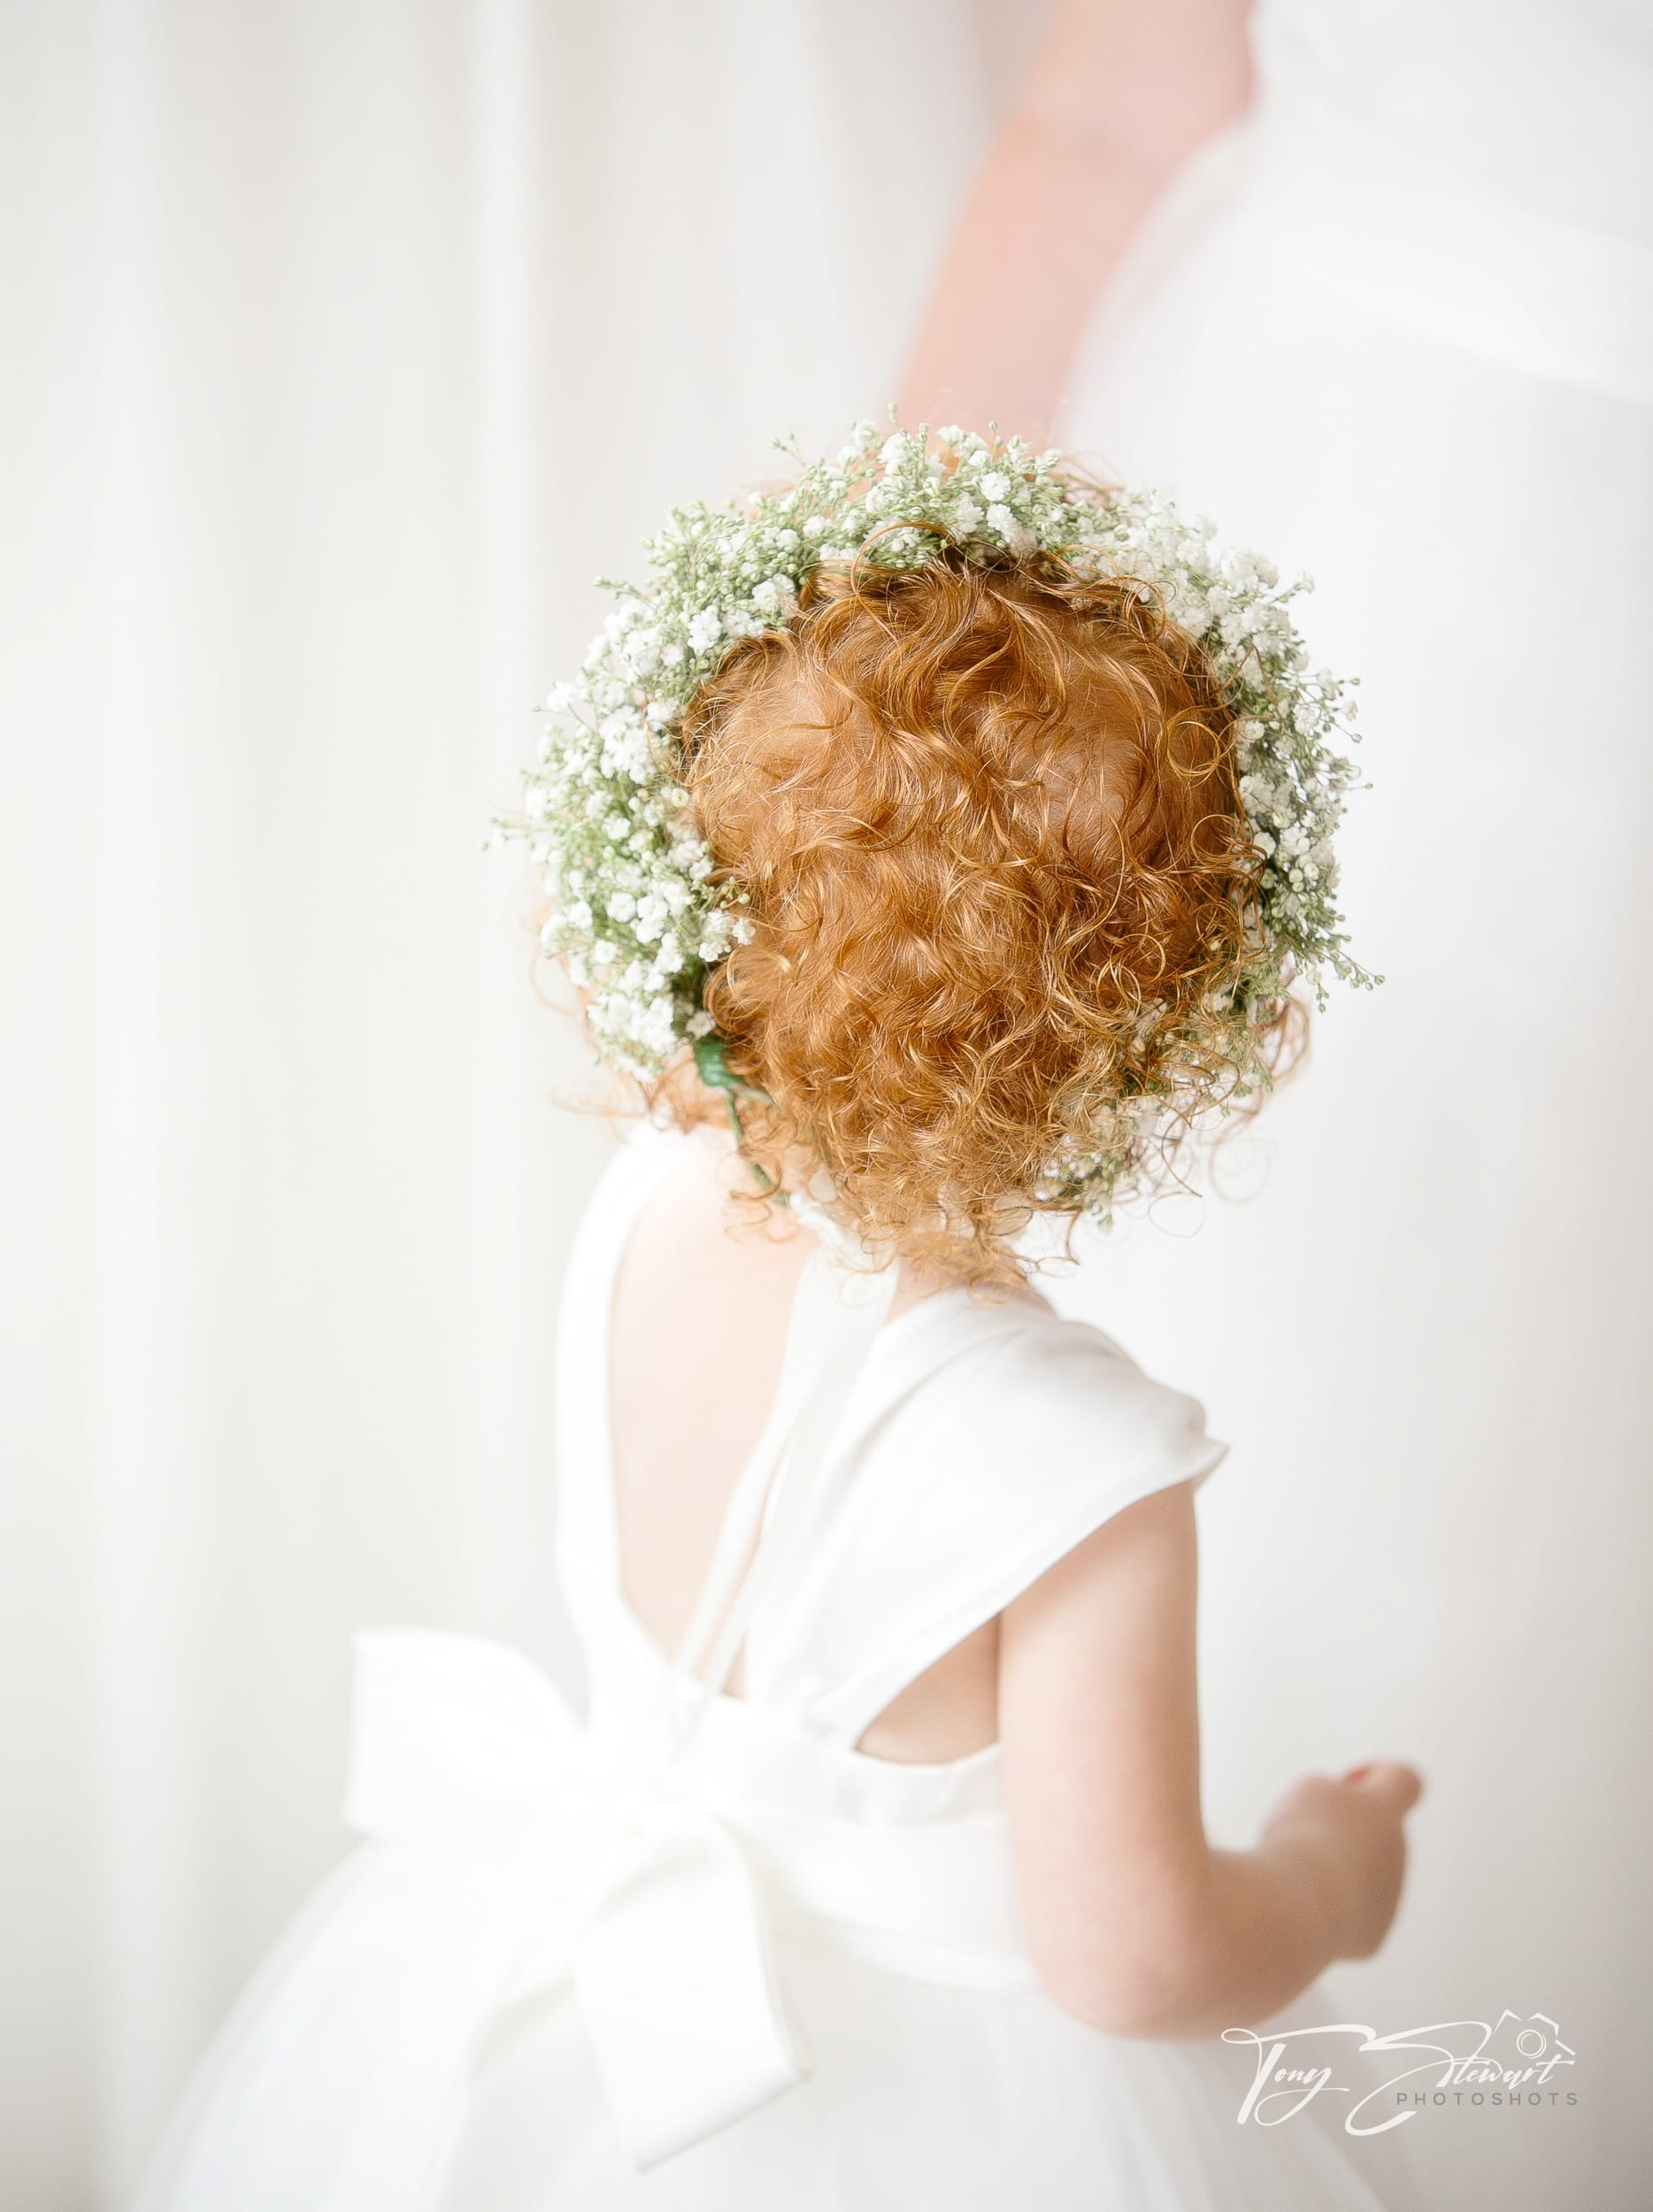 Ginger haired bridesmaid looks up to hanging bridal dress.